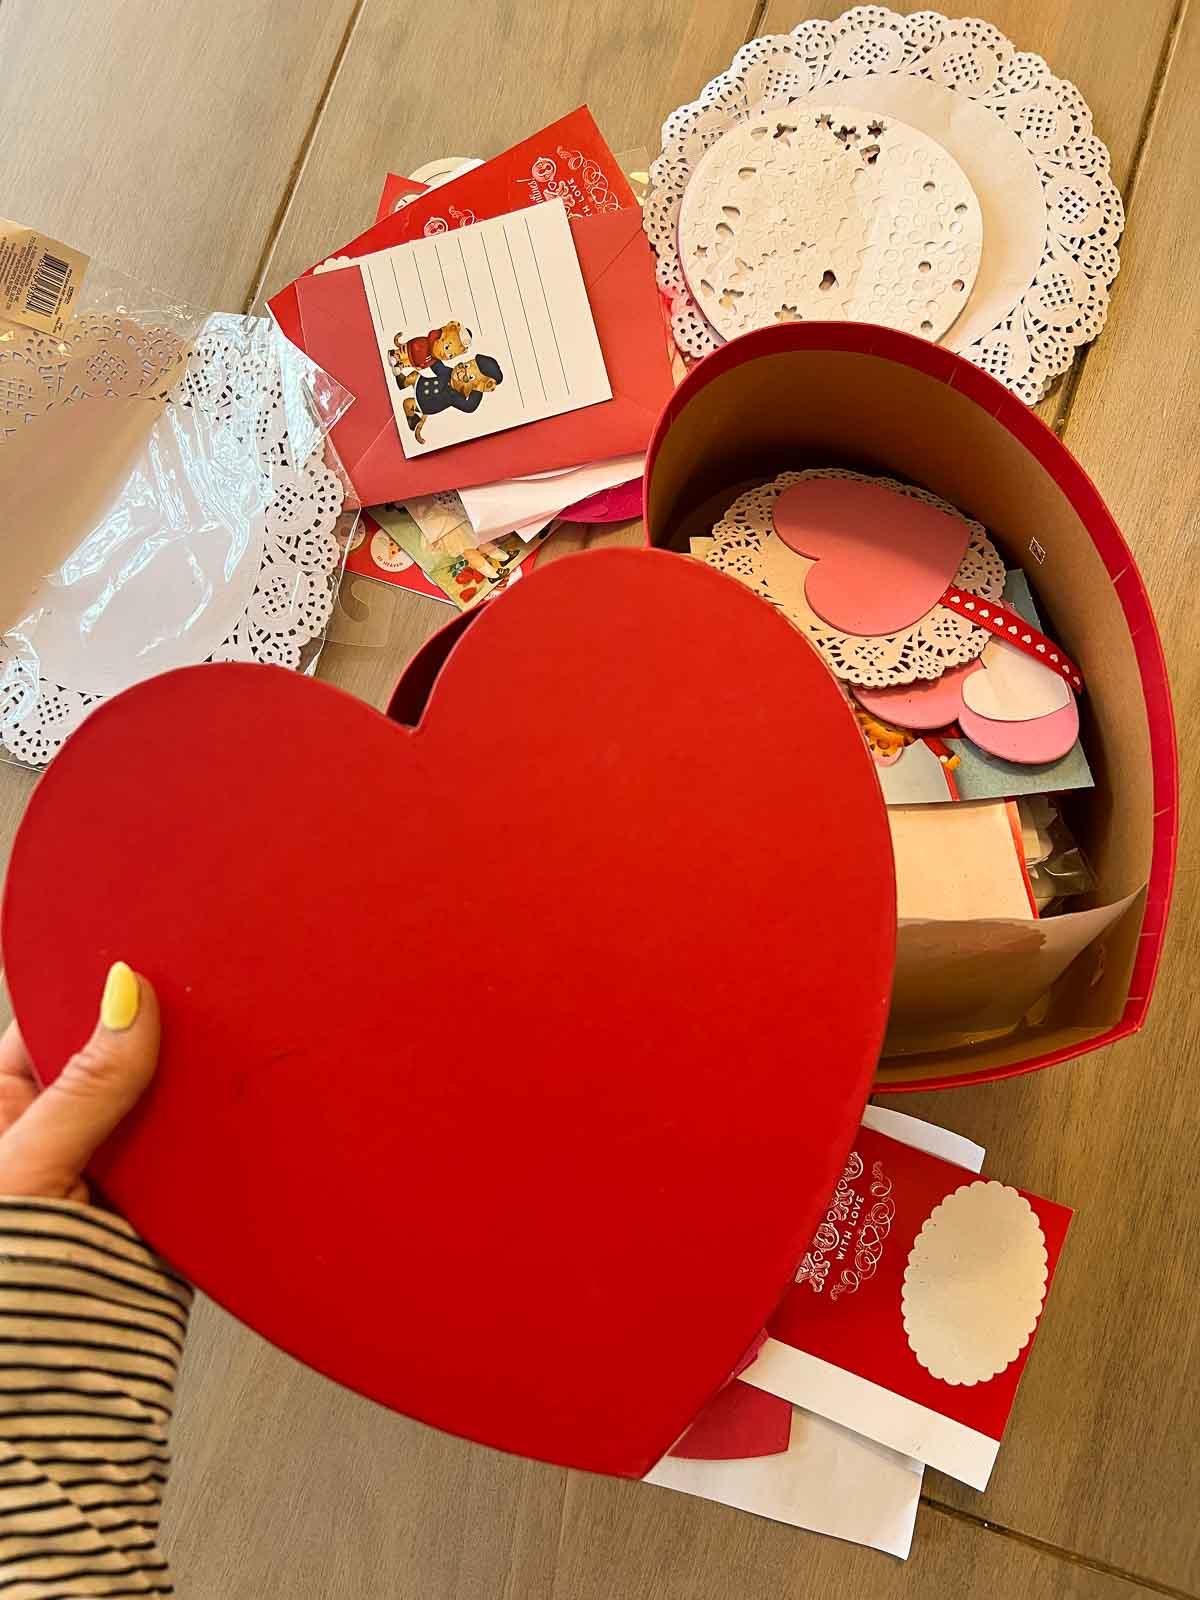 Homemade Valentines Cards in large red heart